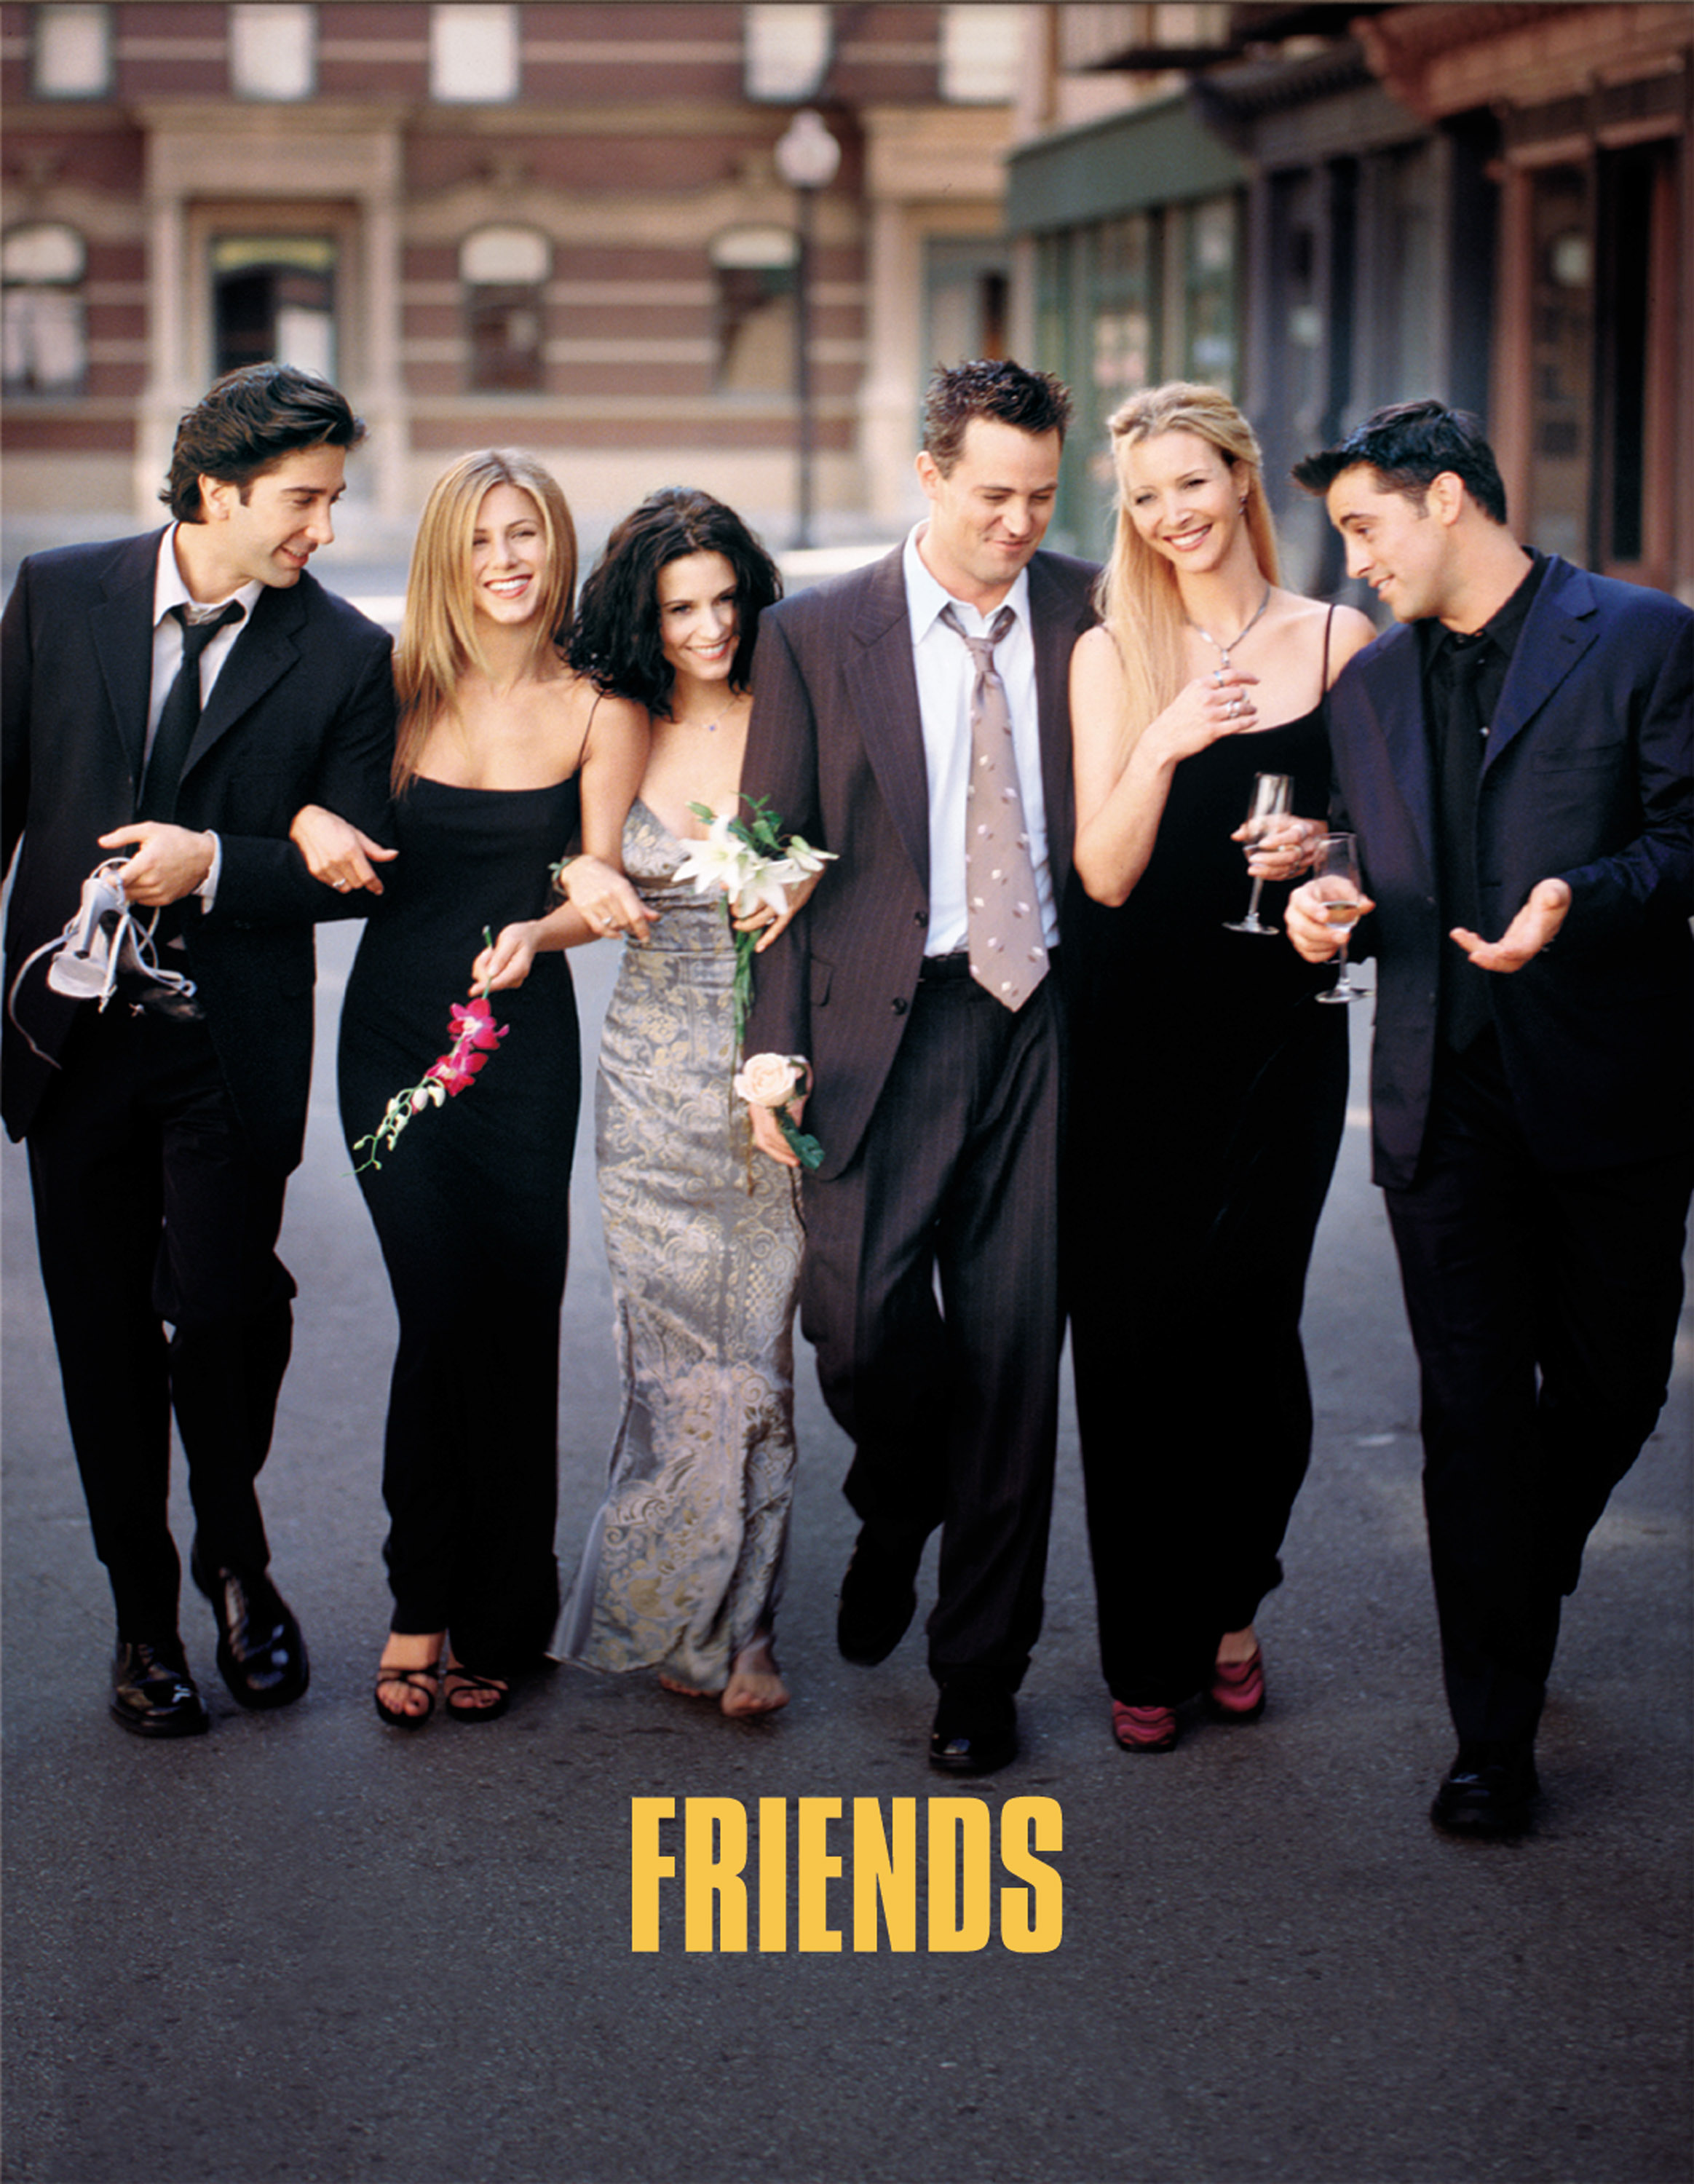 David Schwimmer, Jennifer Aniston, Courteney Cox, Matthew Perry, Lisa Kudrow, and Matt Leblanc as cast members of NBC's comedy series "Friends" | Source: Getty Images